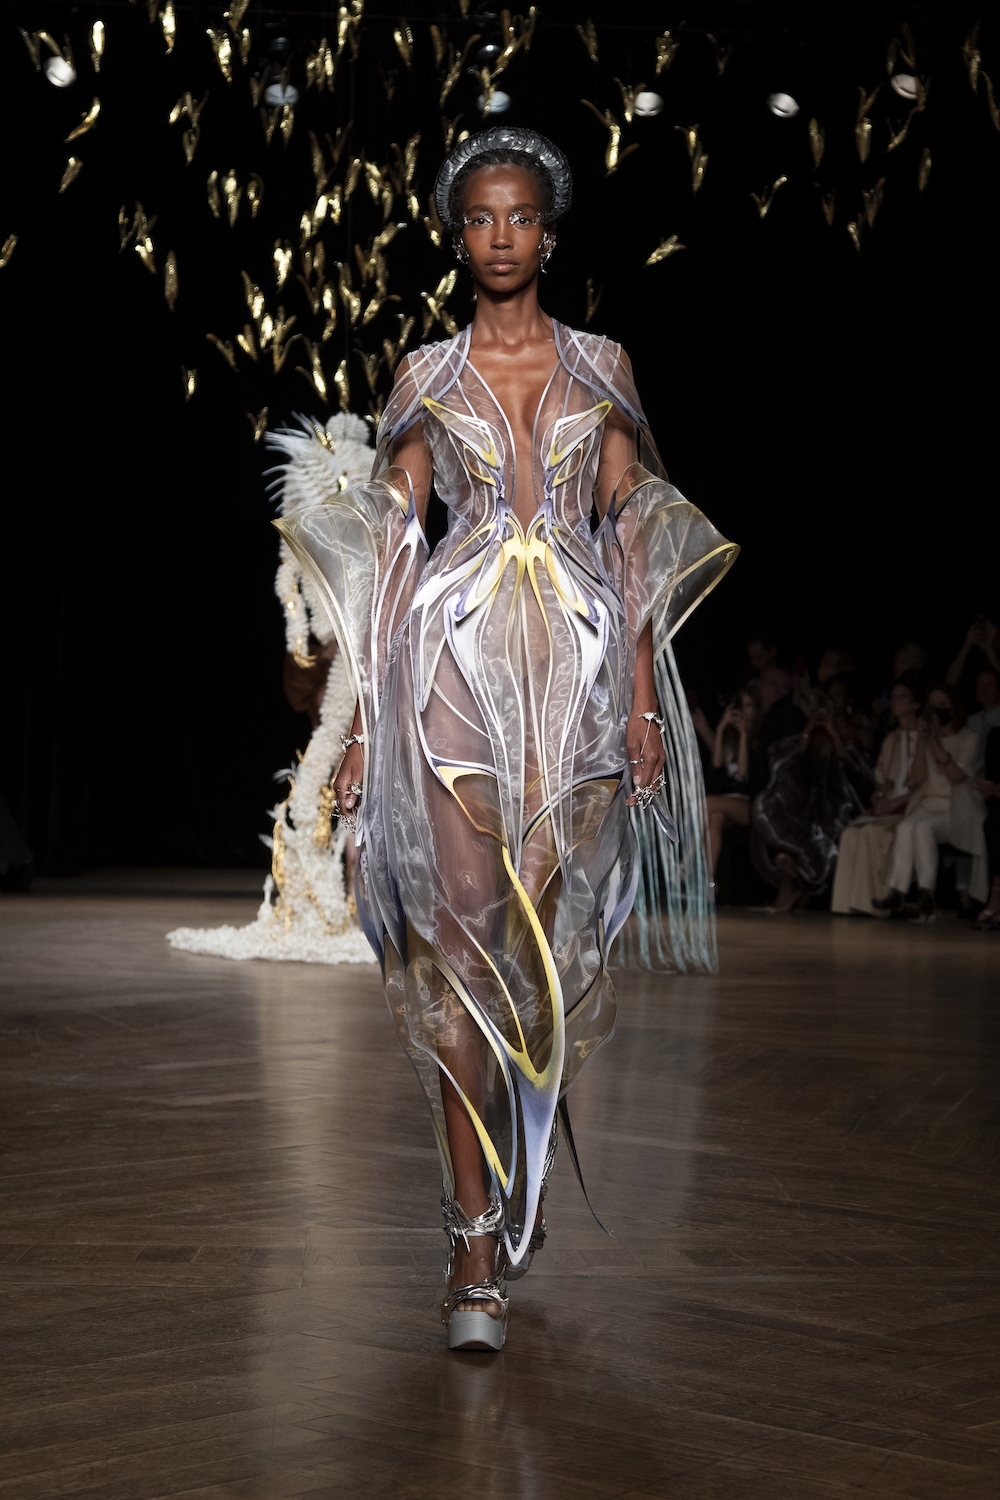 IRIS VAN HERPEN: Beyond Our Physical Bodies for Haute Couture Fall 2022 PFW